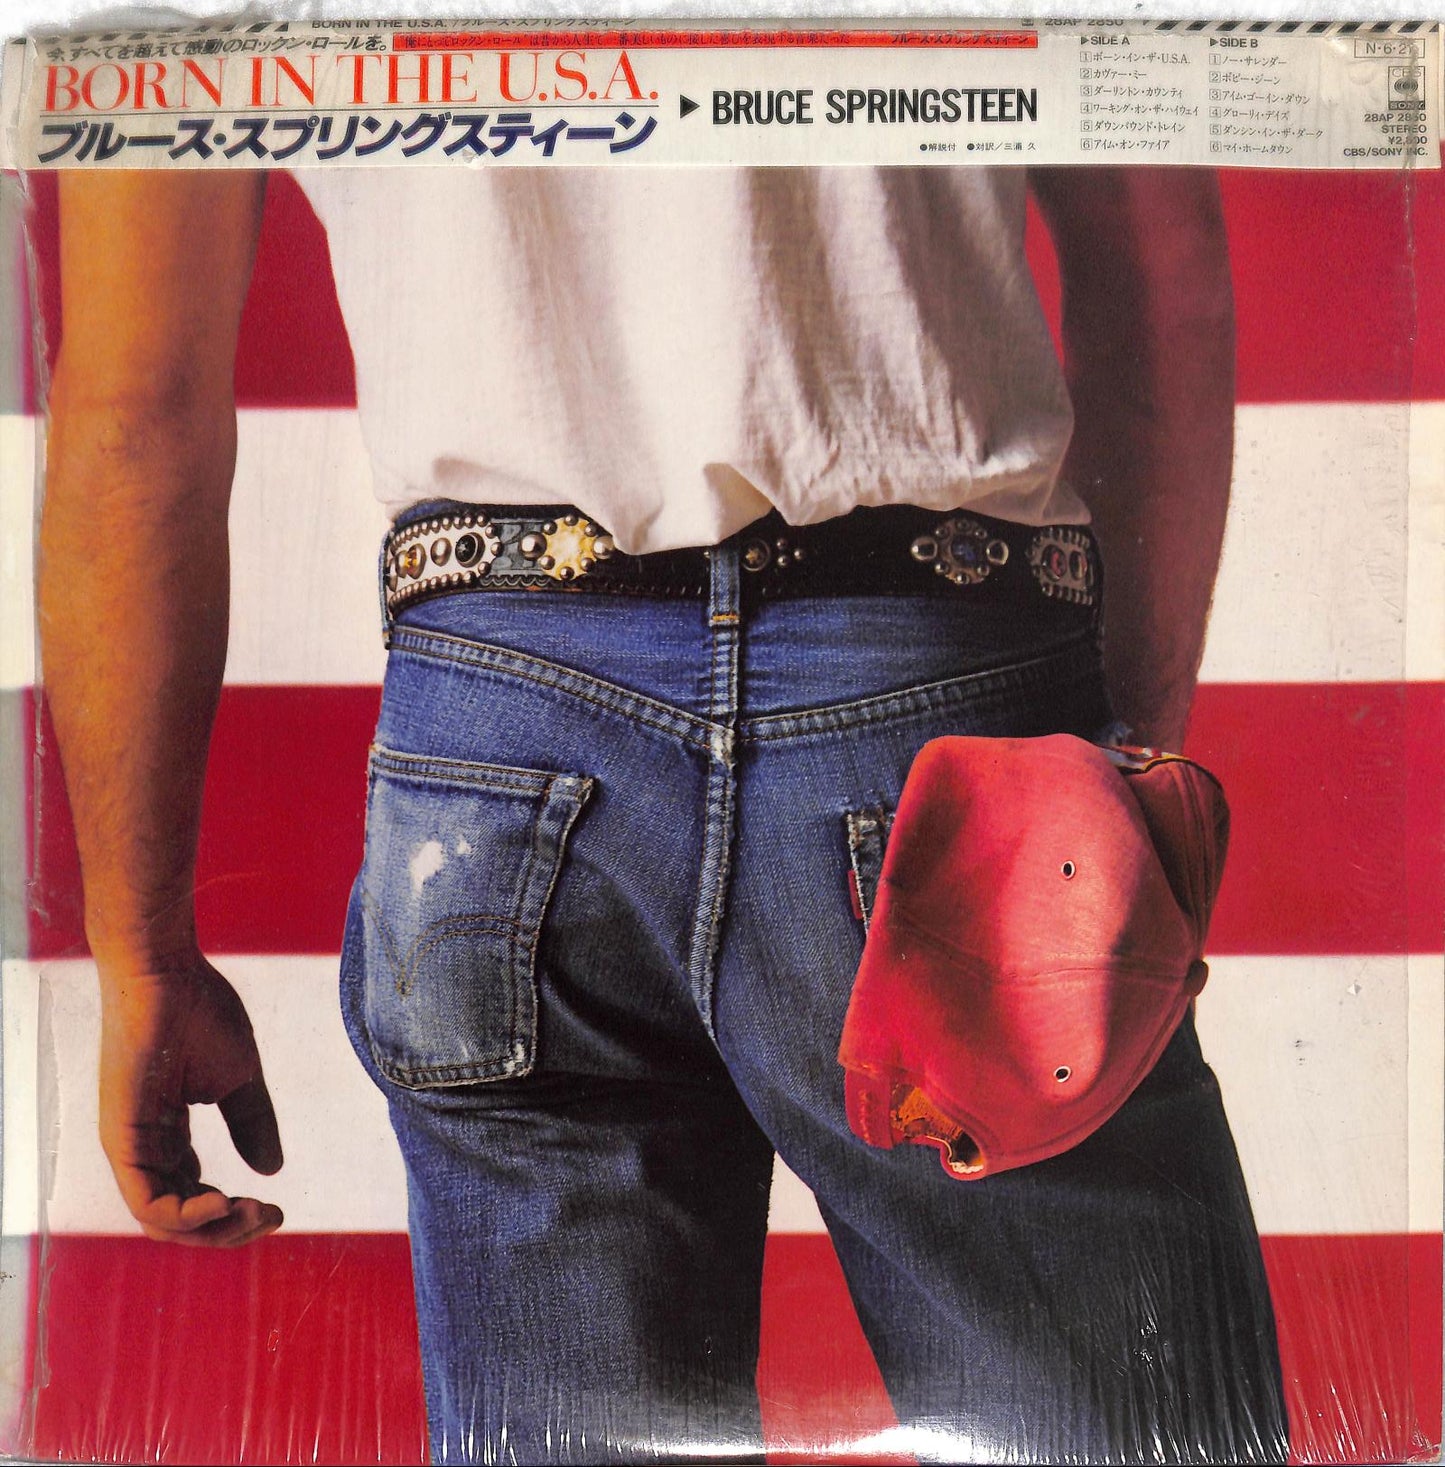 BRUCE SPRINGSTEEN - Born In The U.S.A.